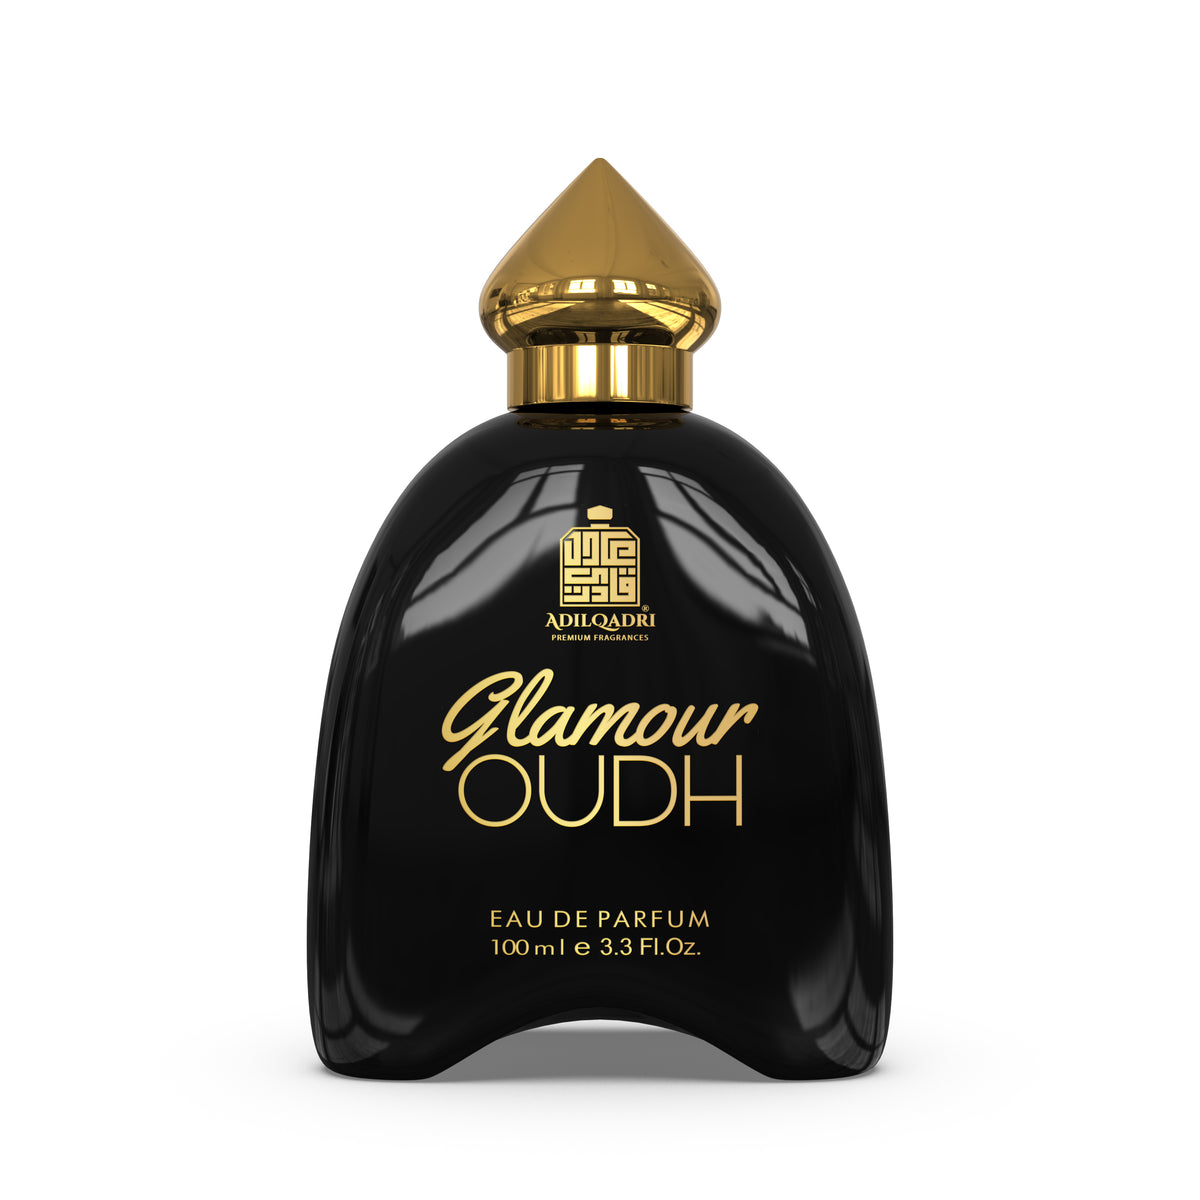 (Combo) Glamour Oudh And The Professor Perfume Spray 100 Ml Each